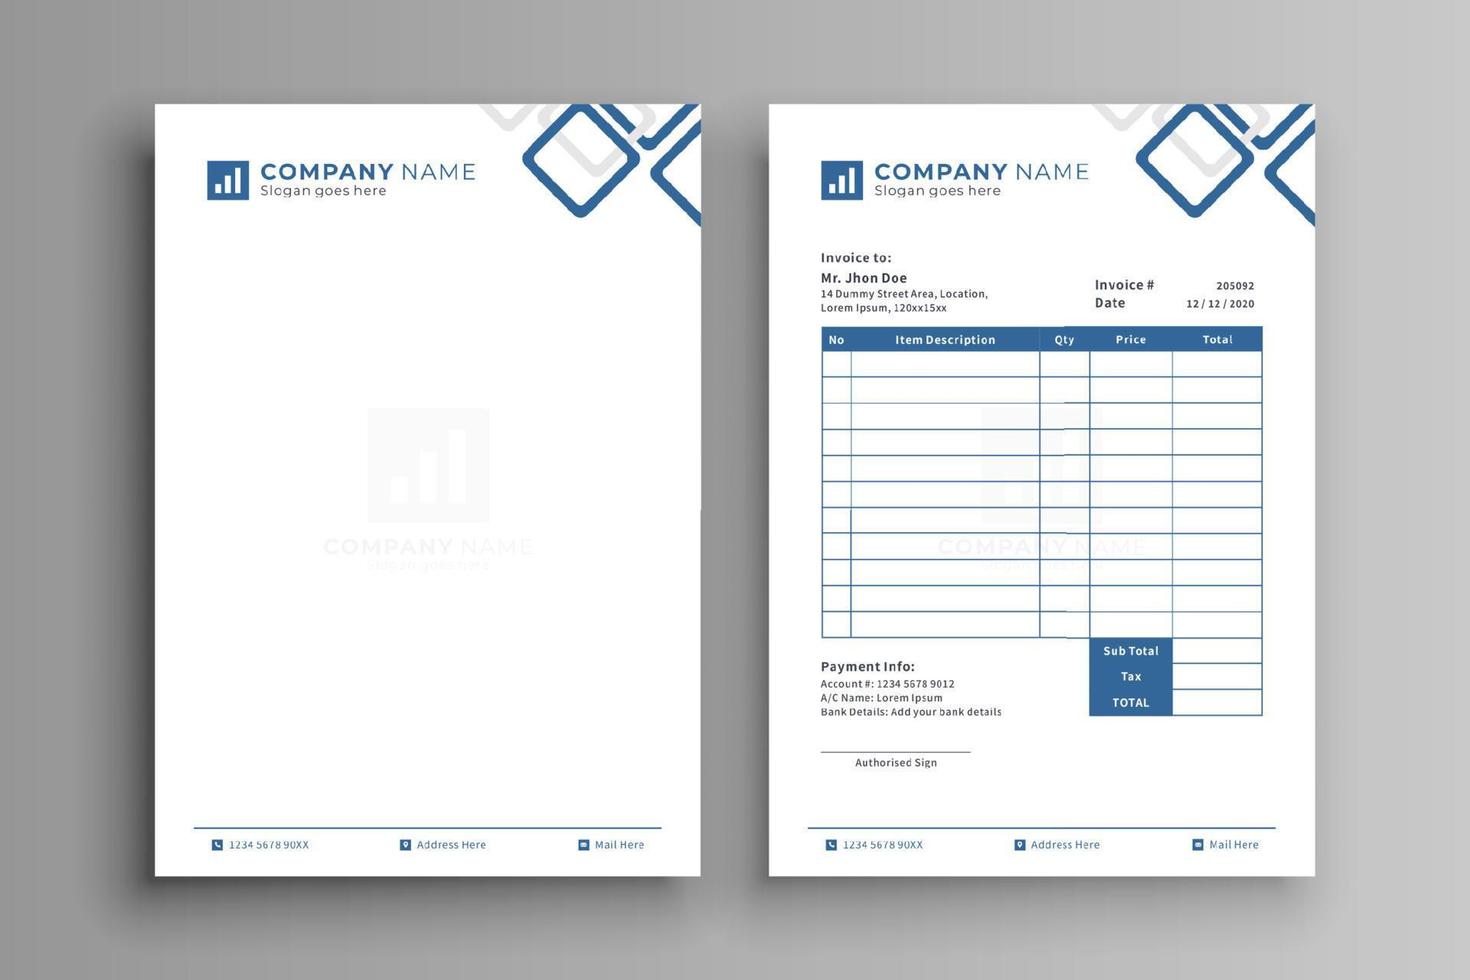 Modern Business Letterhead and Invoice Design Template vector